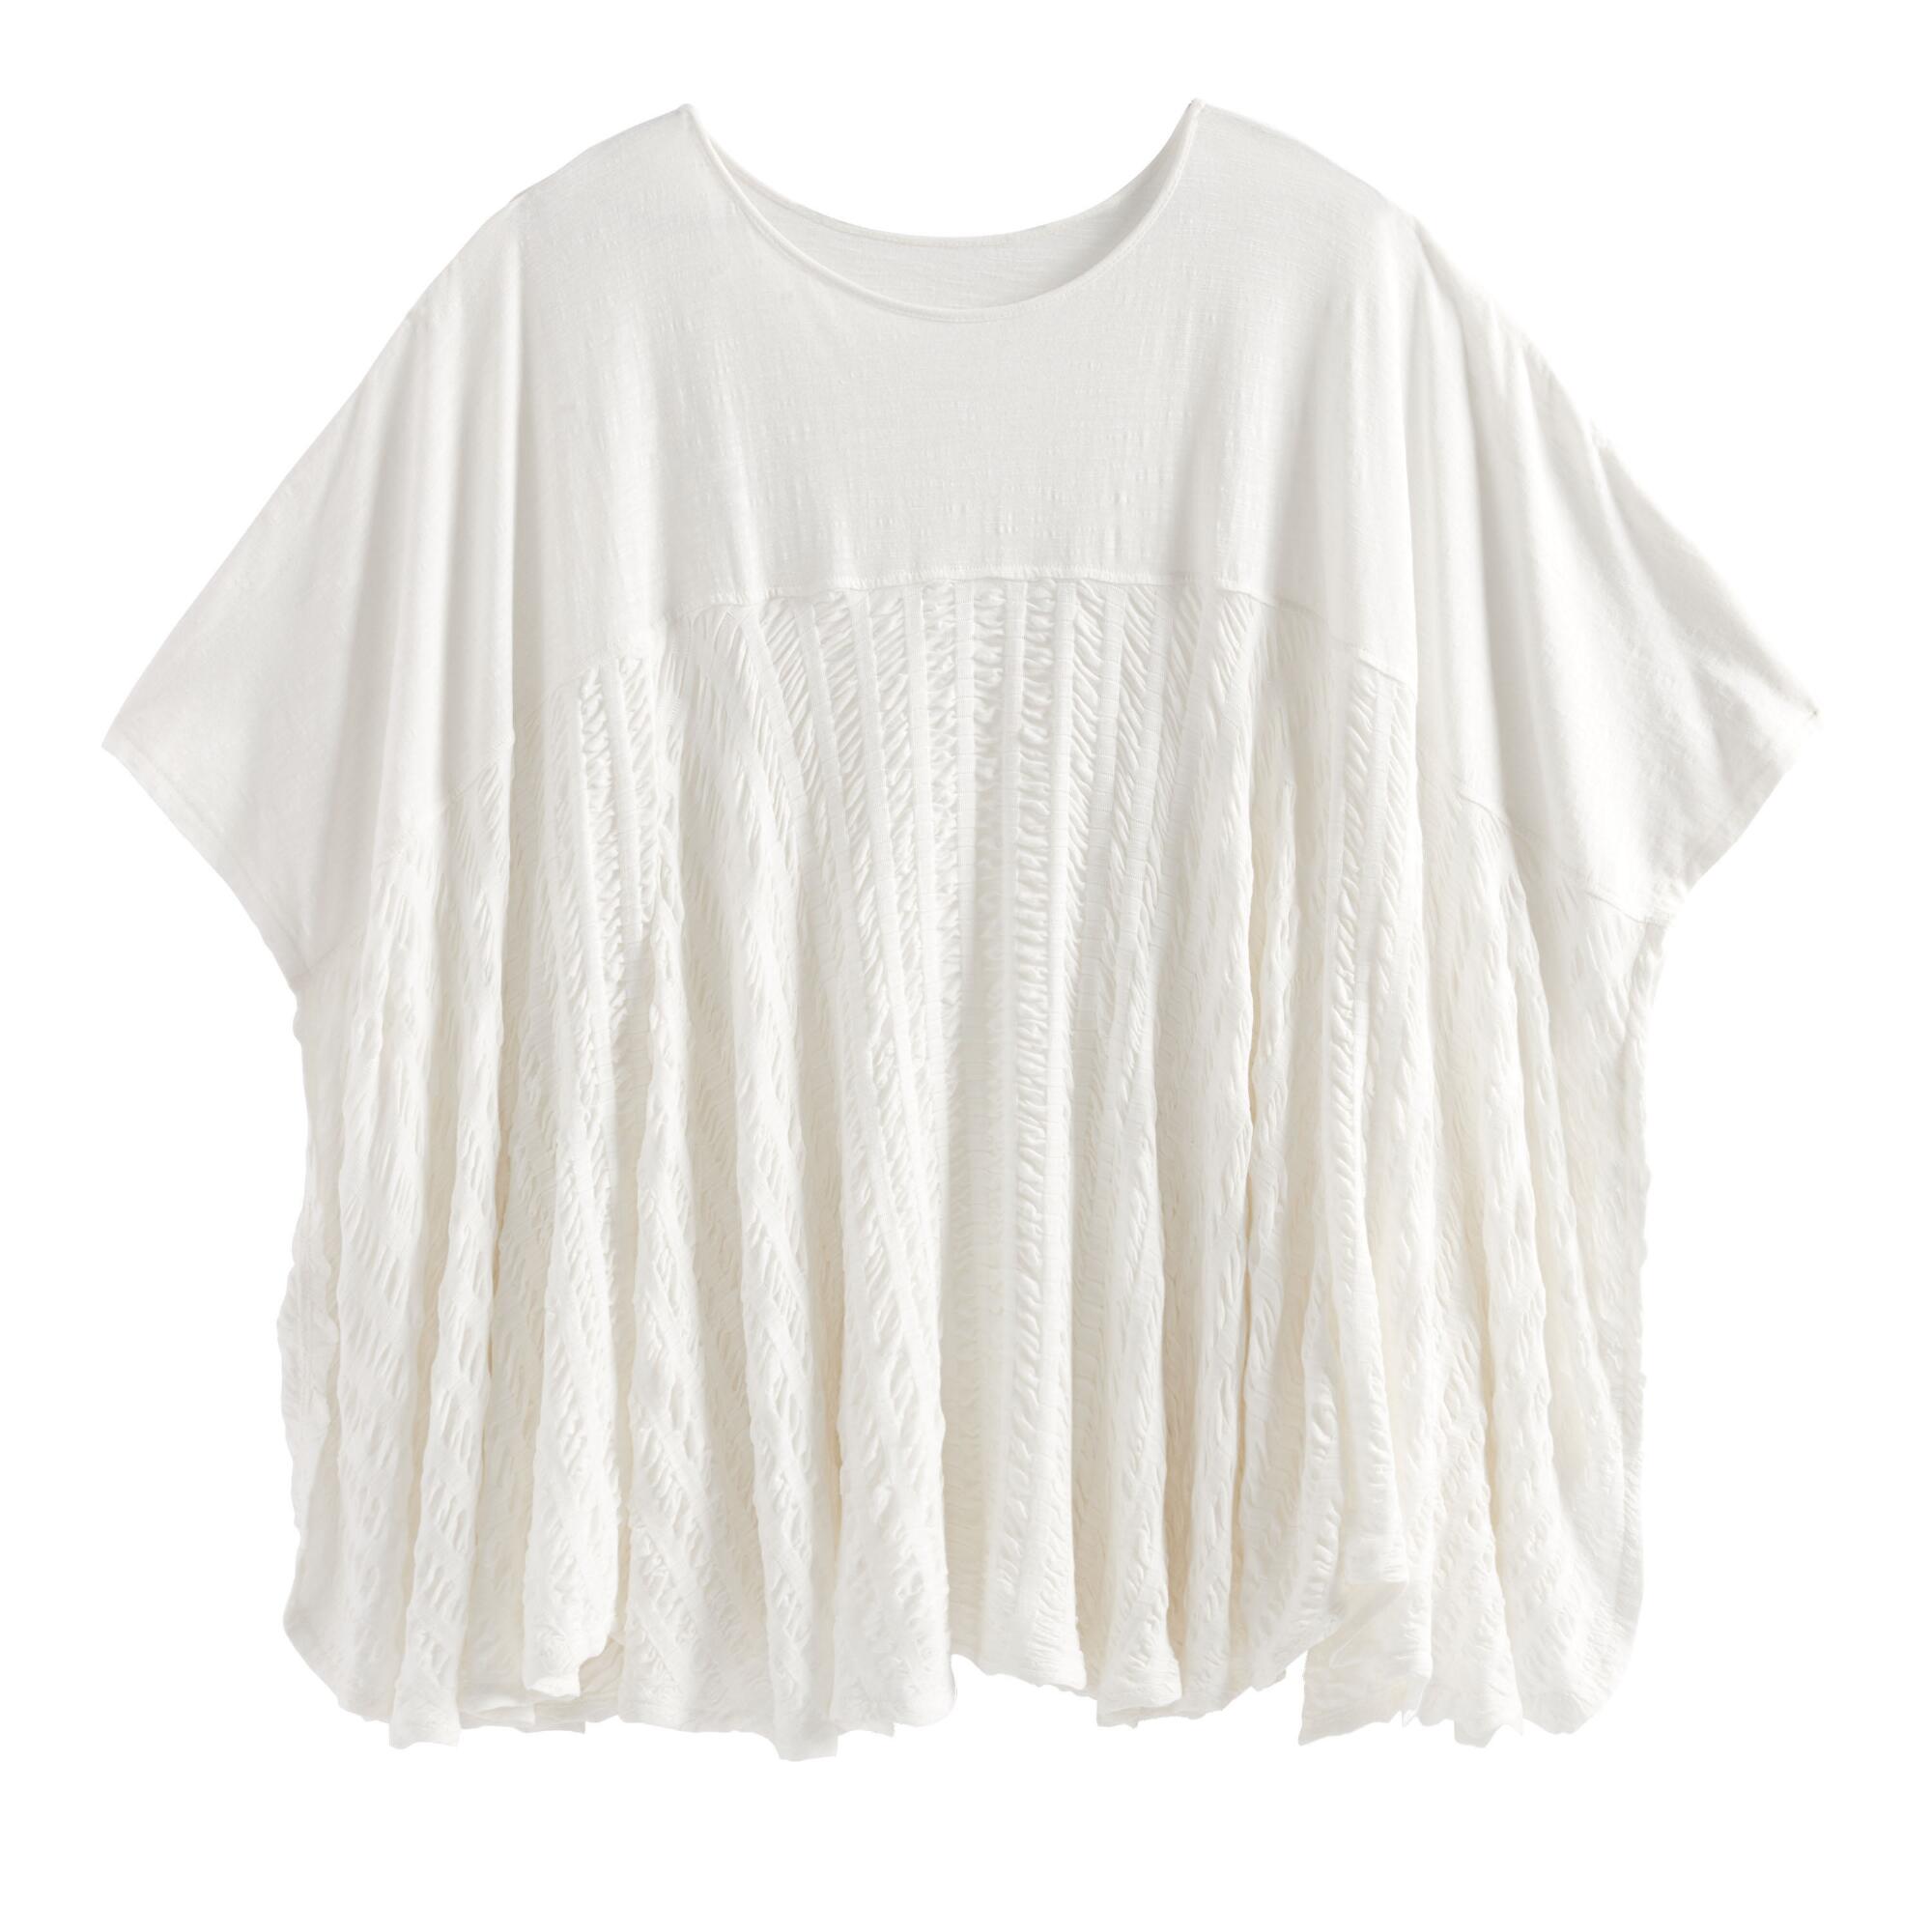 Ivory Textured Trapeze Lounge Top: White by World Market